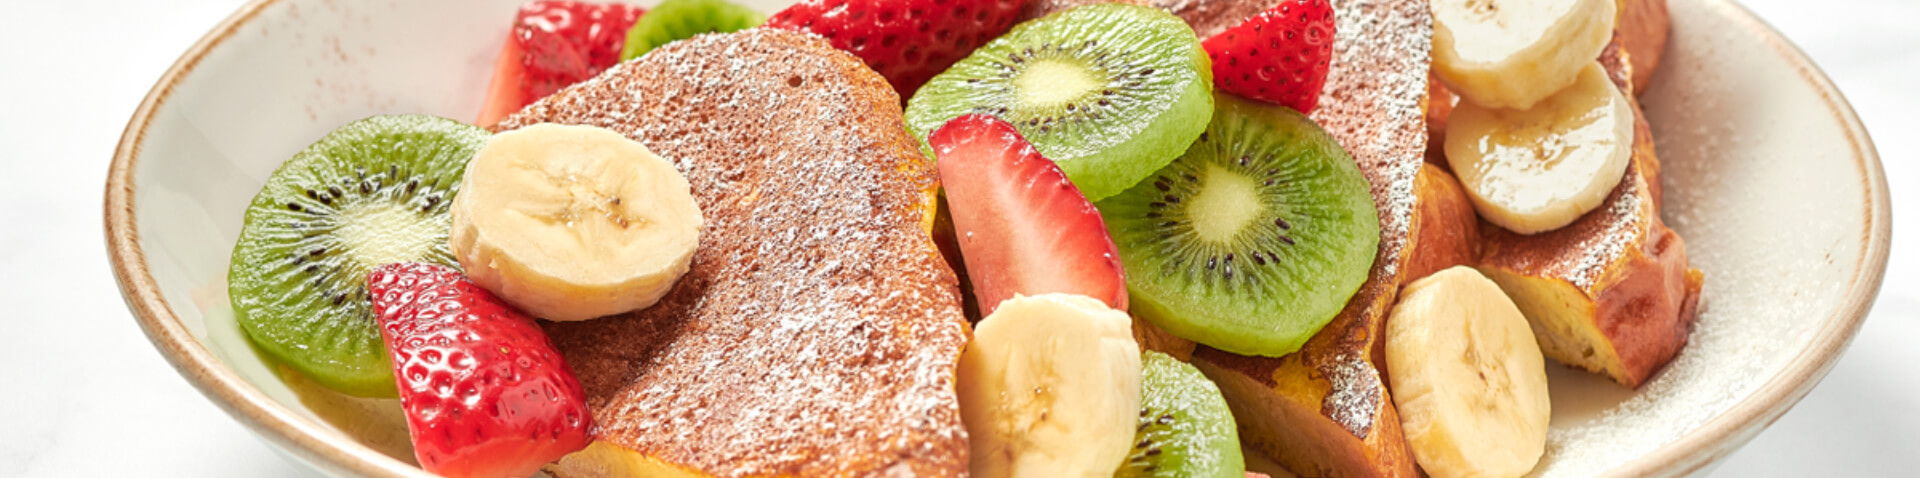 french toast with kiwis, bananas and strawberries